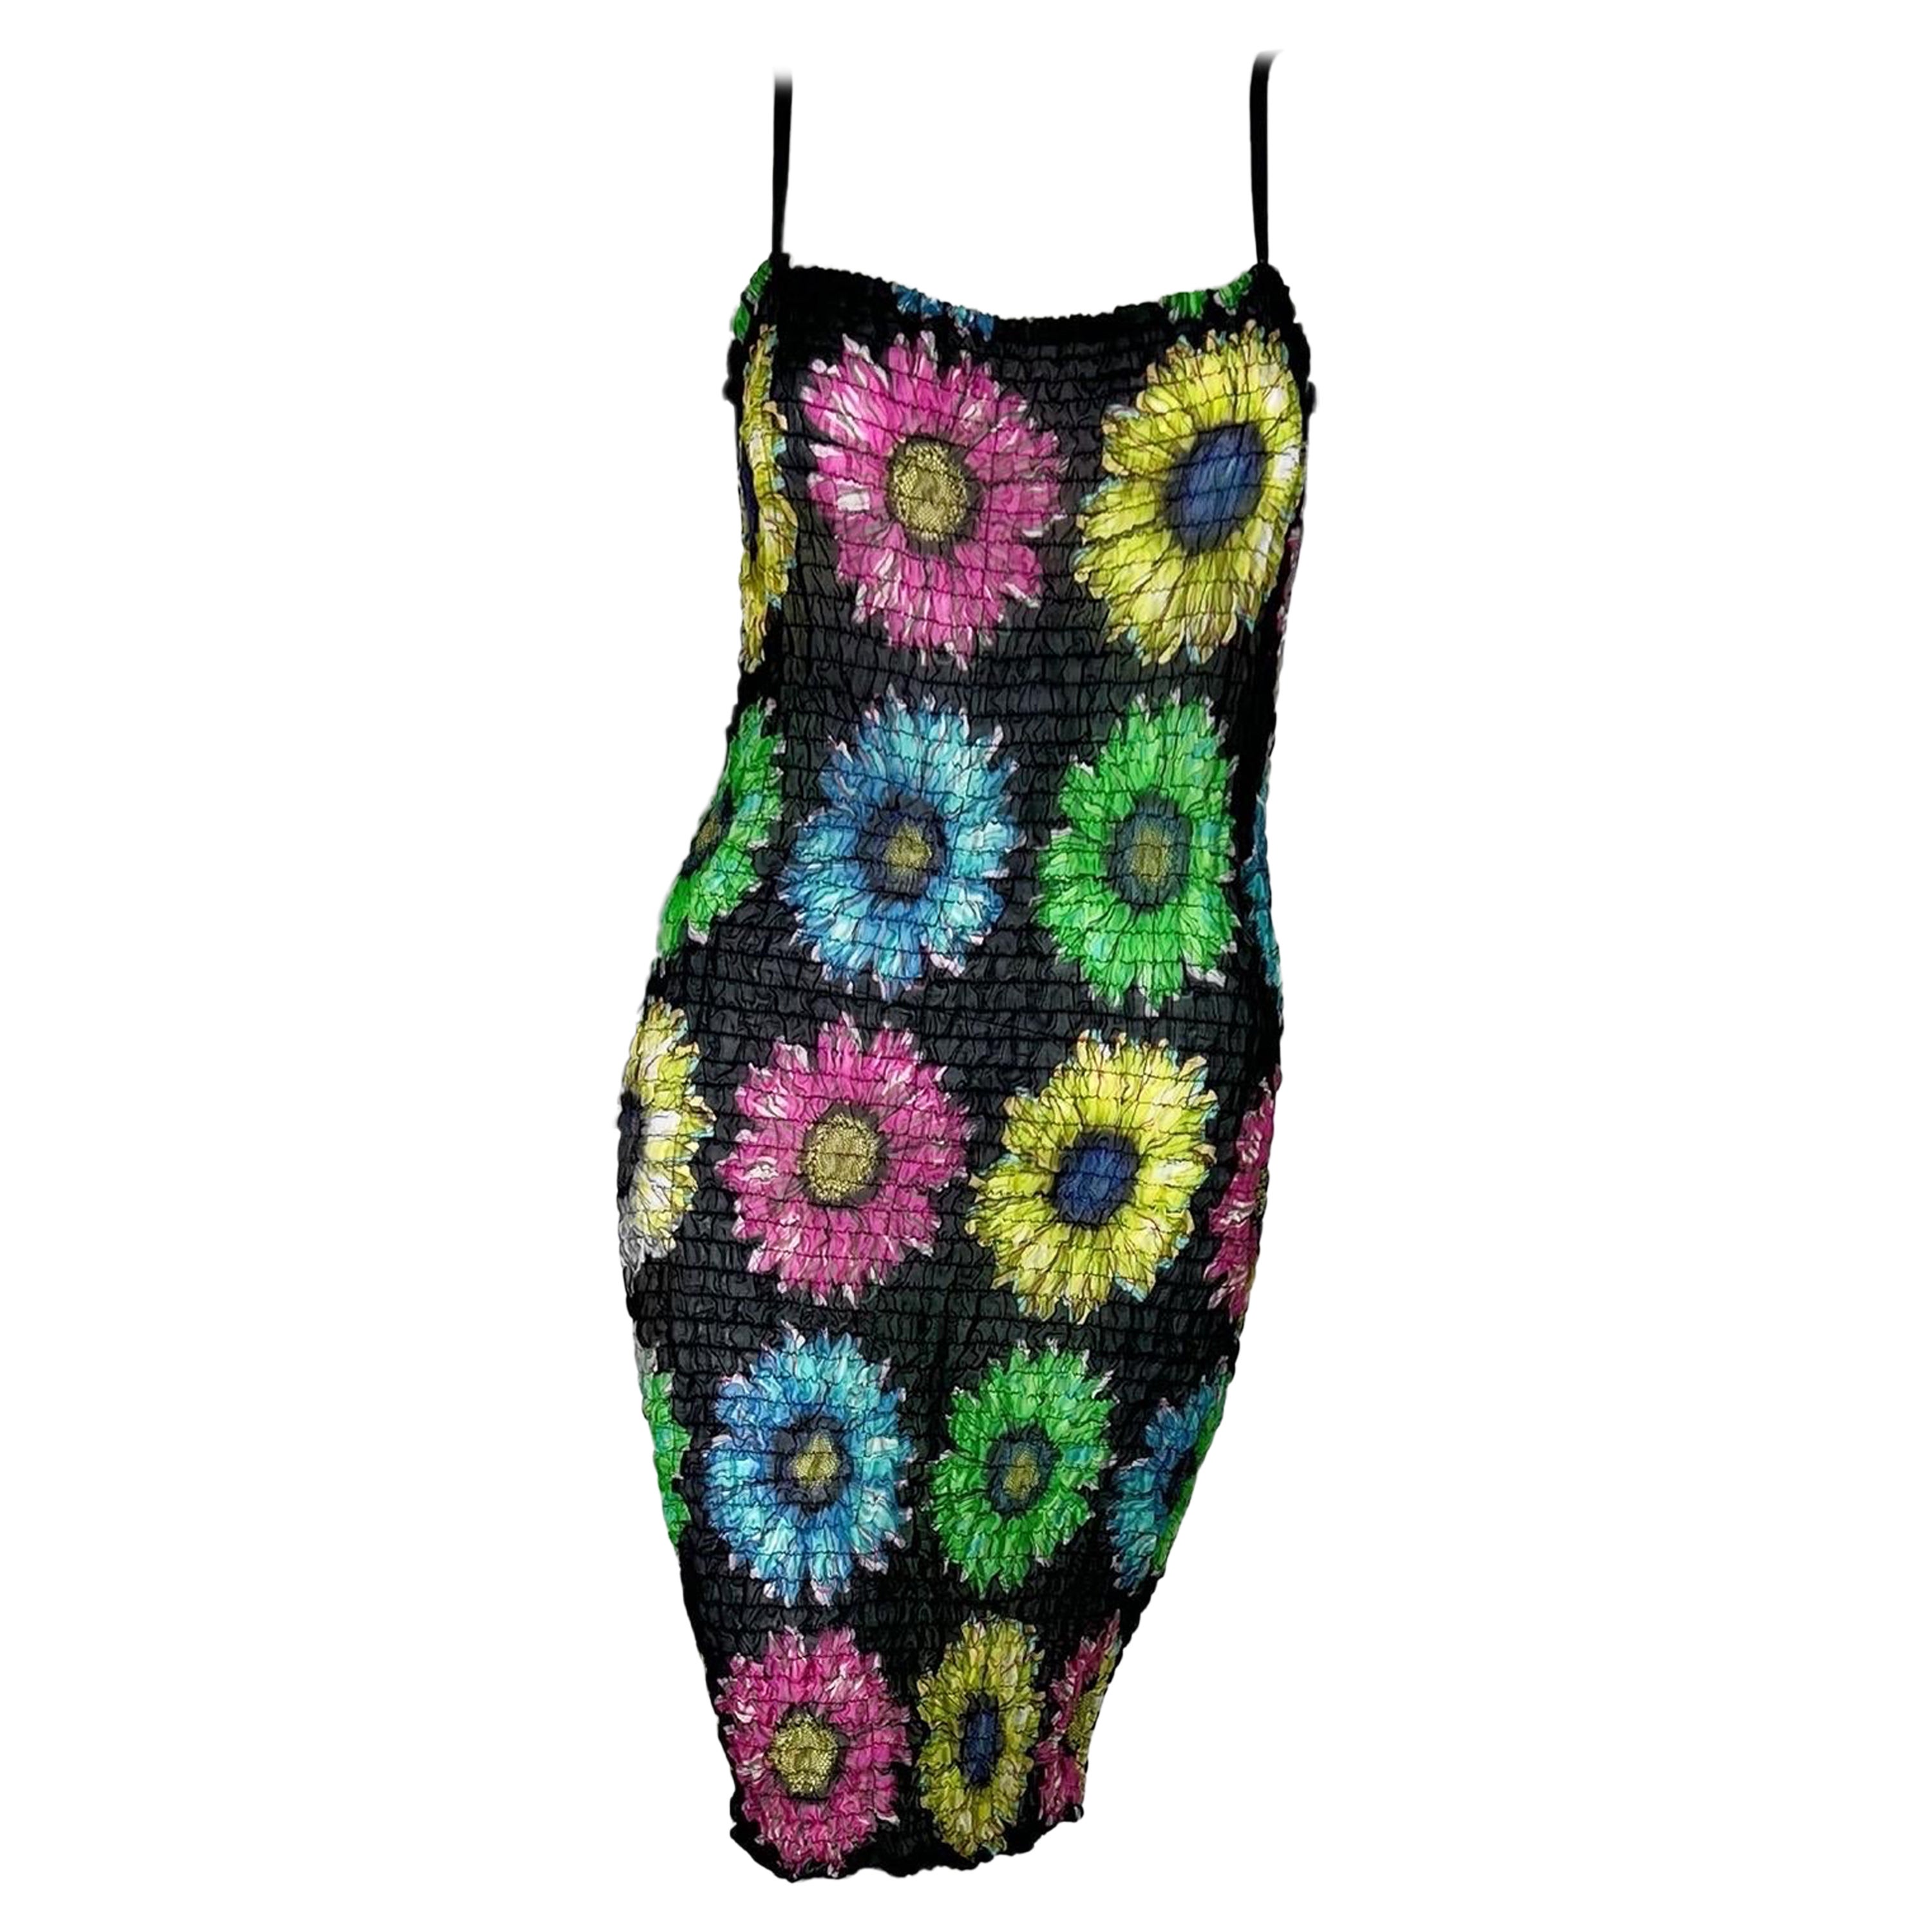 SS 2002 Versace by Donatella Versace Sheer Sunflower Print Dress For Sale